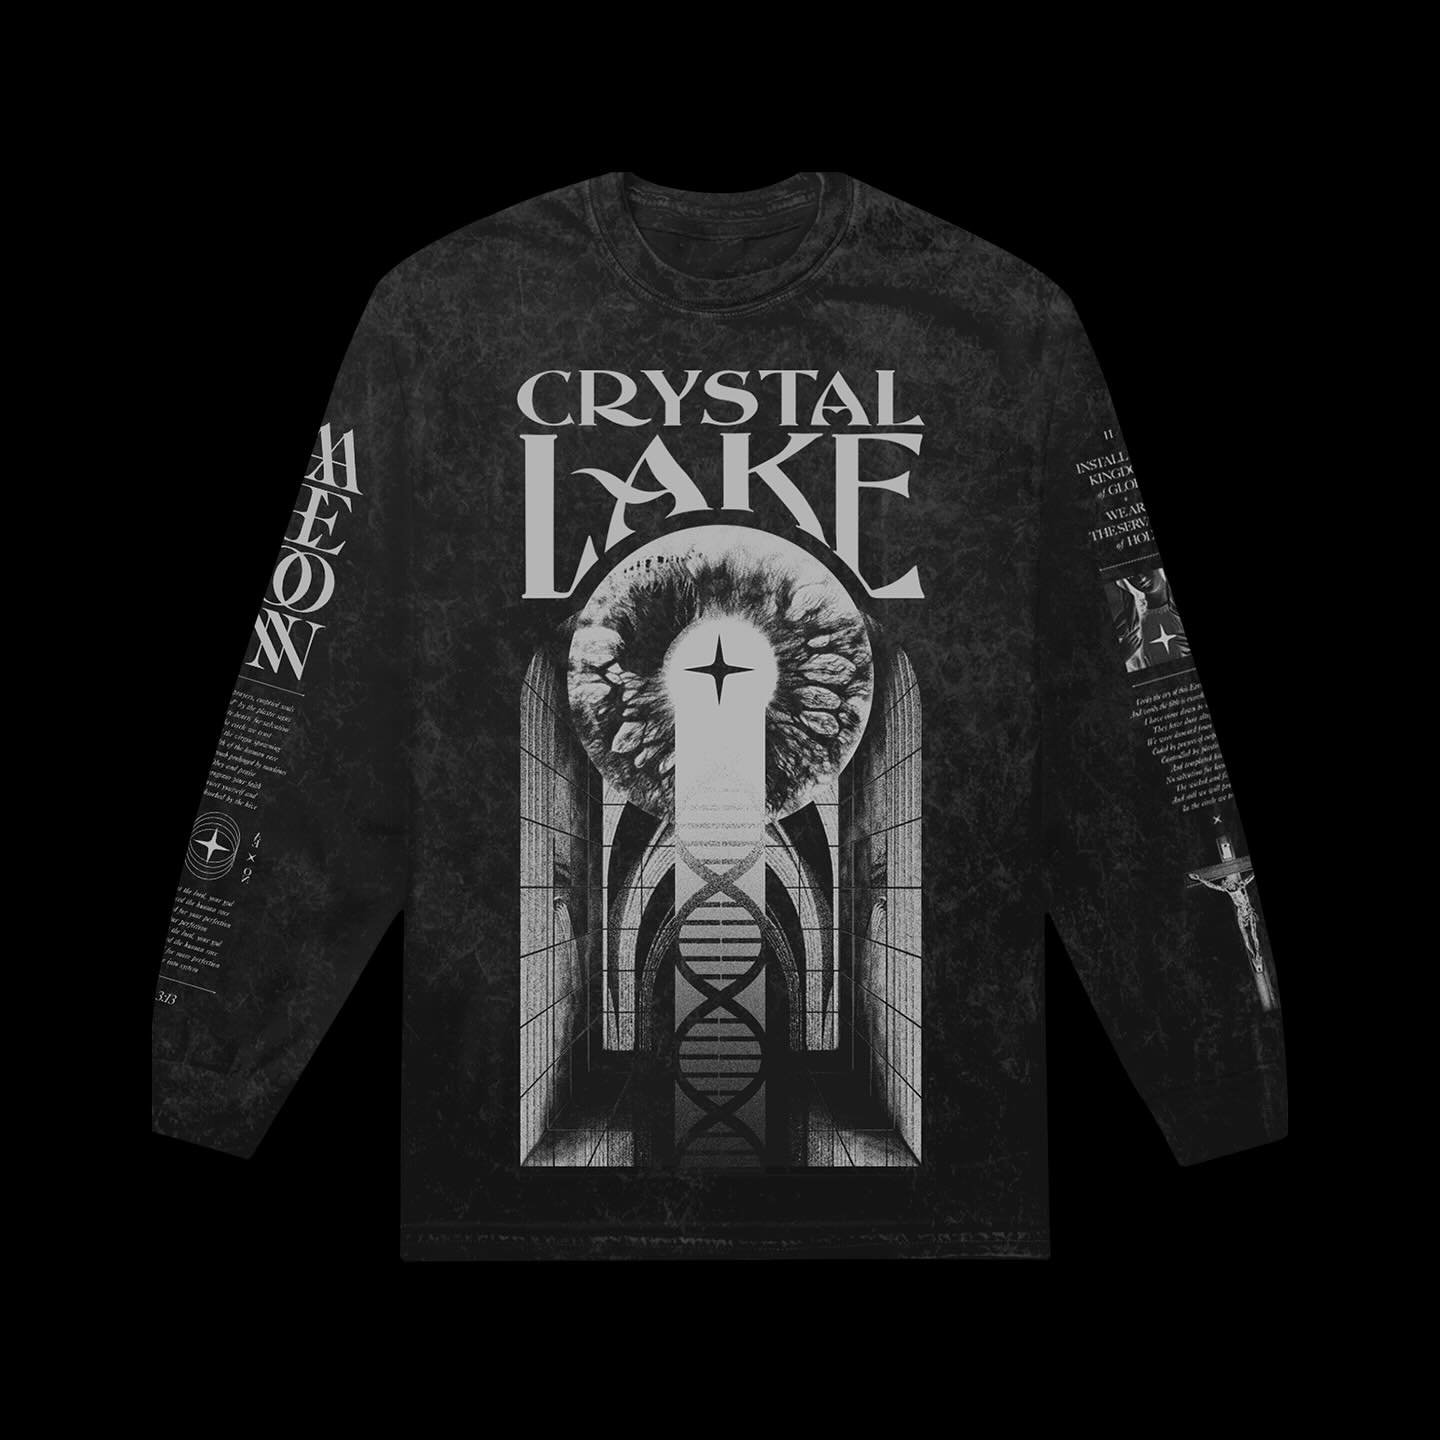 It&rsquo;s been a hot minute since I&rsquo;ve shared a #flashbackfriday post! I designed this longsleeve for @crystallake777 at the start of the pandemic, and three years later, I&rsquo;m still lamenting over how it was never picked up. One of my all